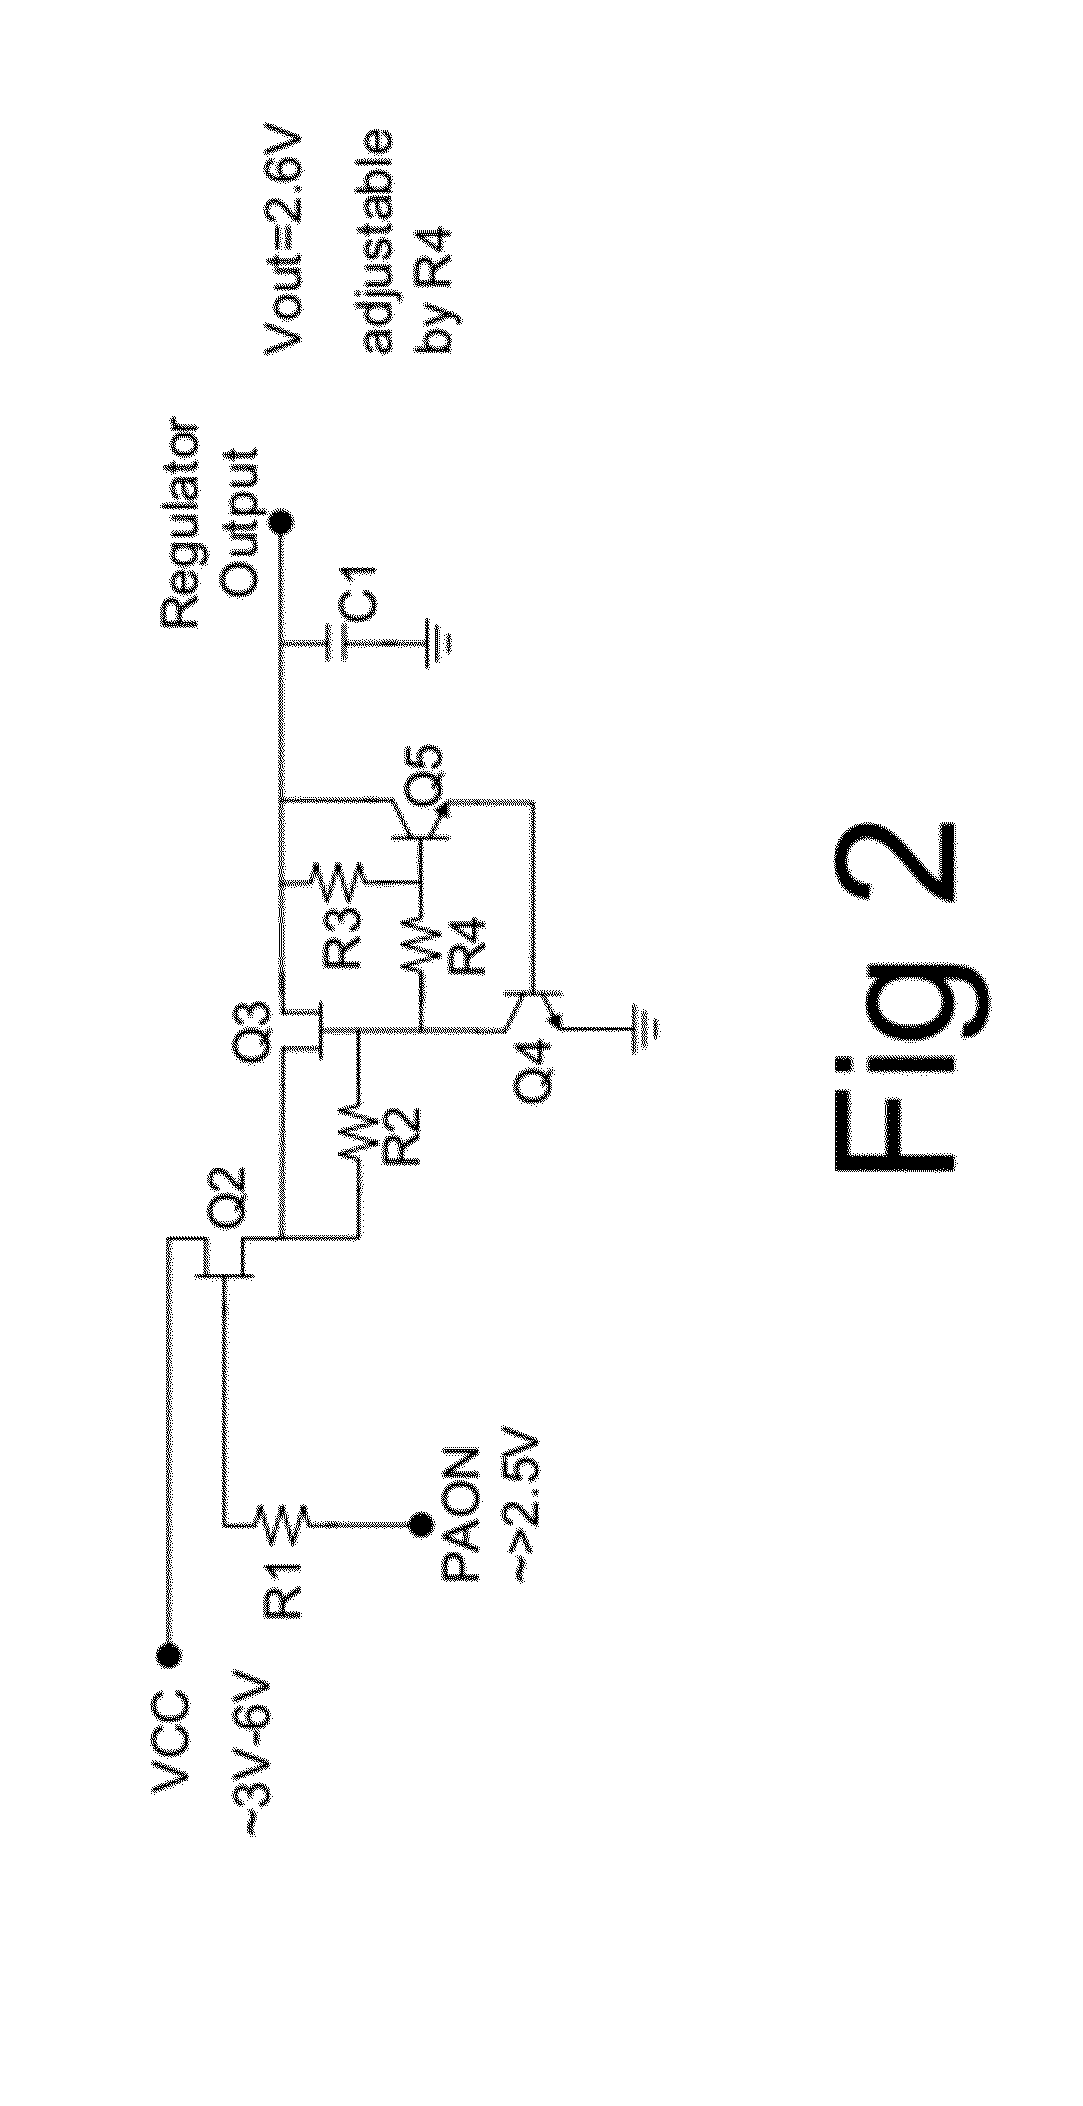 Regulator and temperature compensation bias circuit for linearized power amplifier